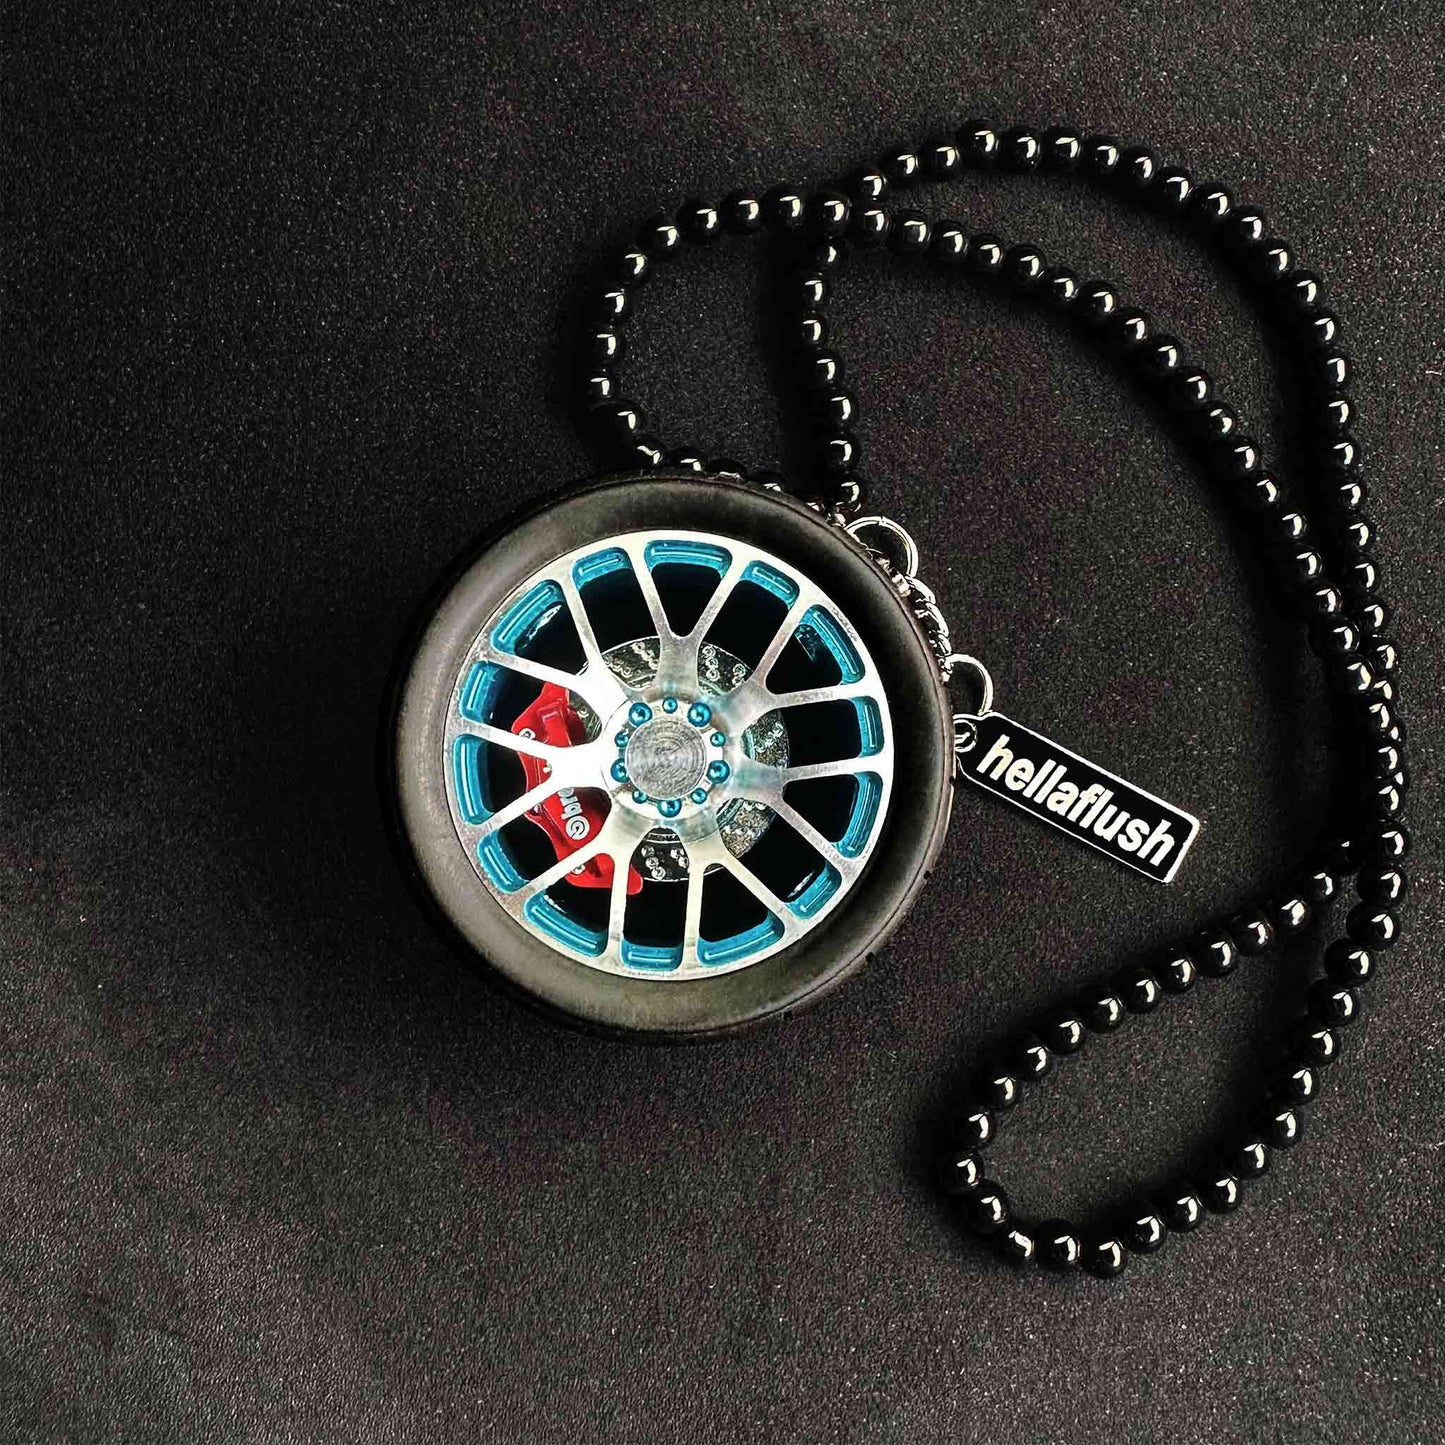 A blue BBS wheel air-freshener placed on a black background